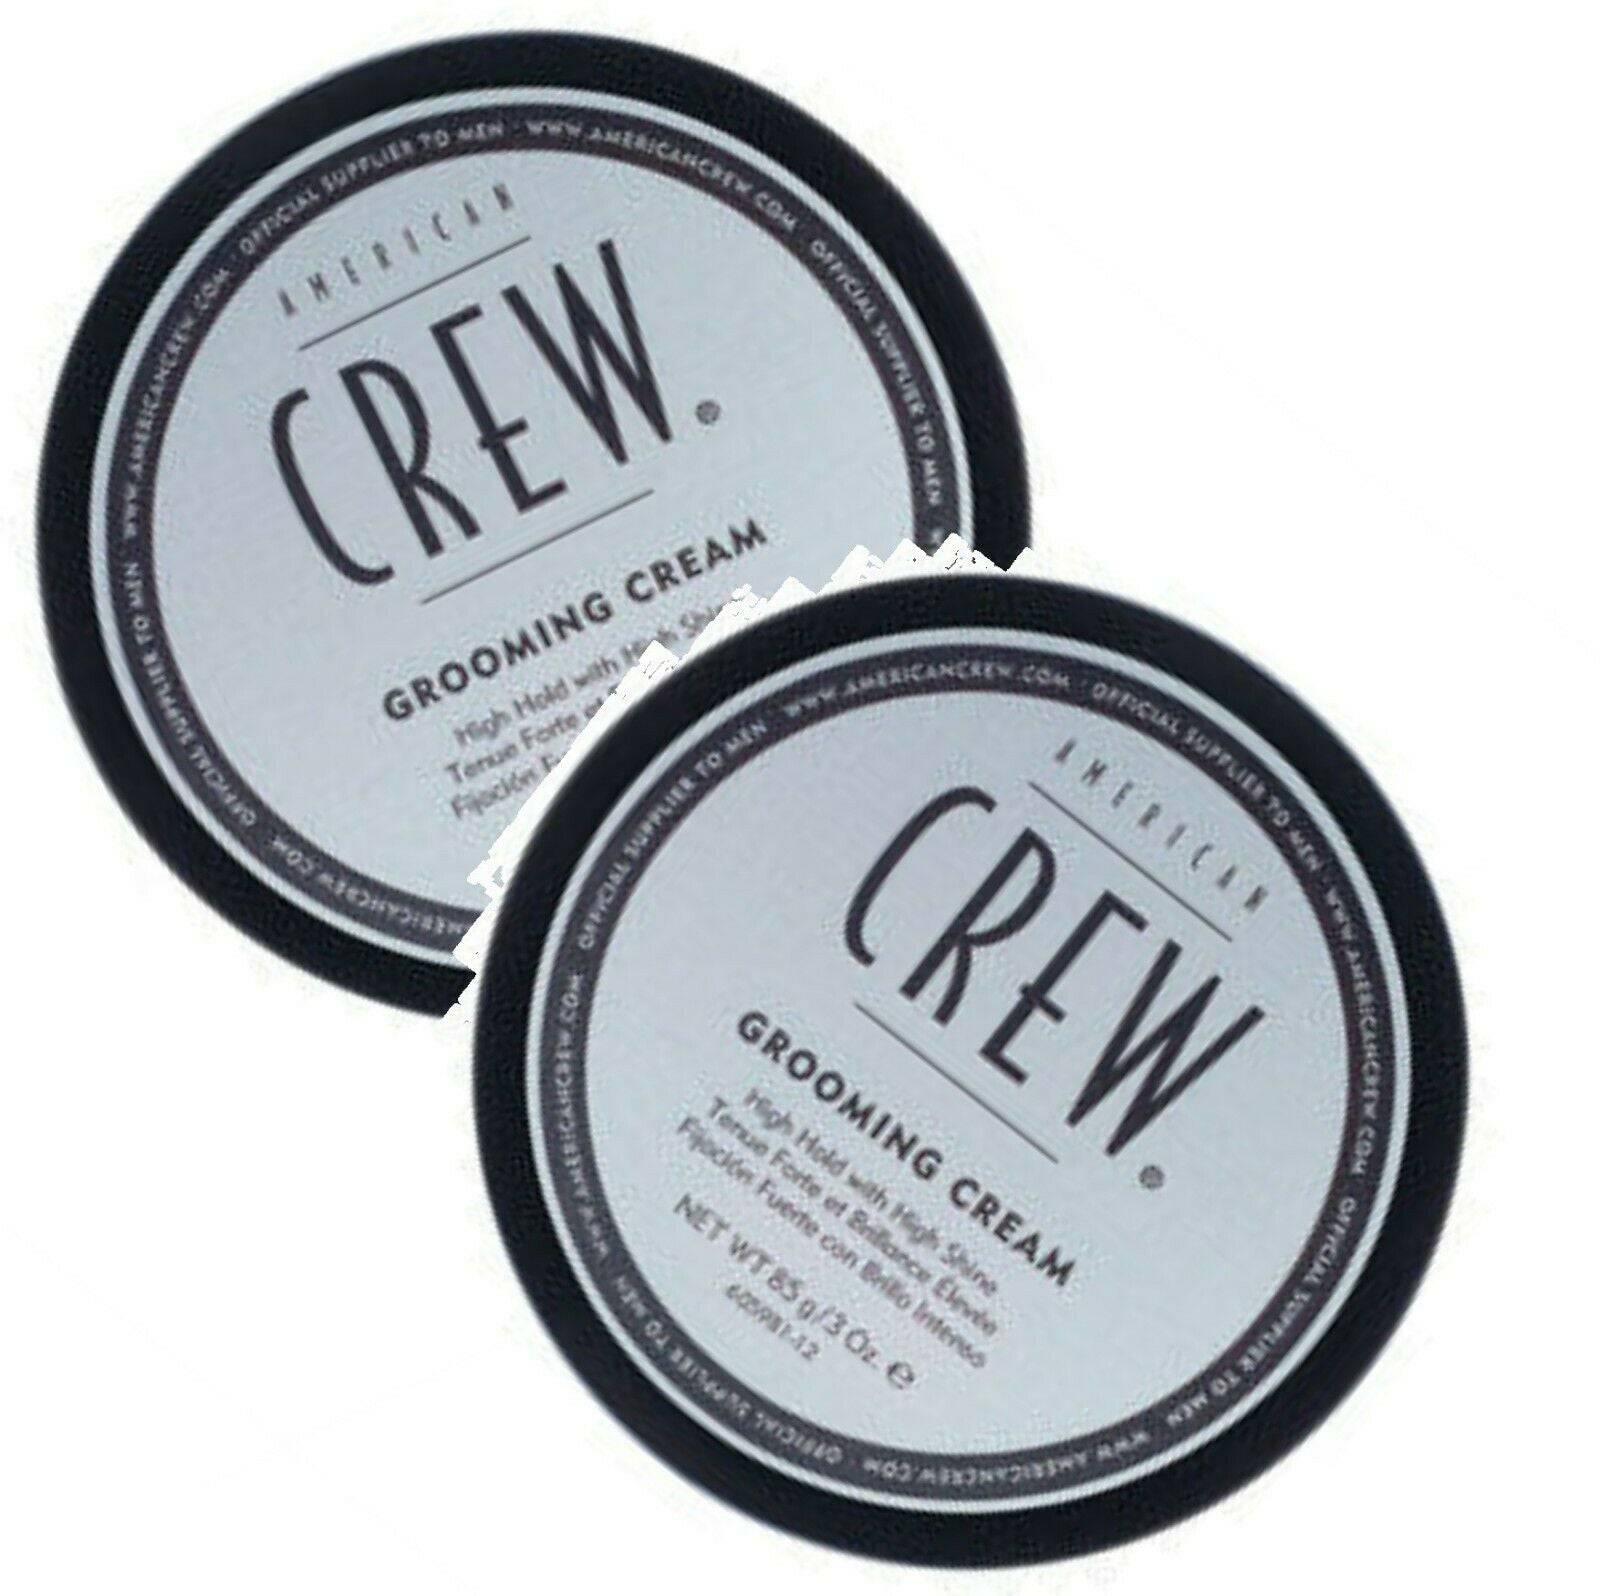 American Crew Grooming Cream 2 x 85g  Grooming Cream with high hold and shine - On Line Hair Depot